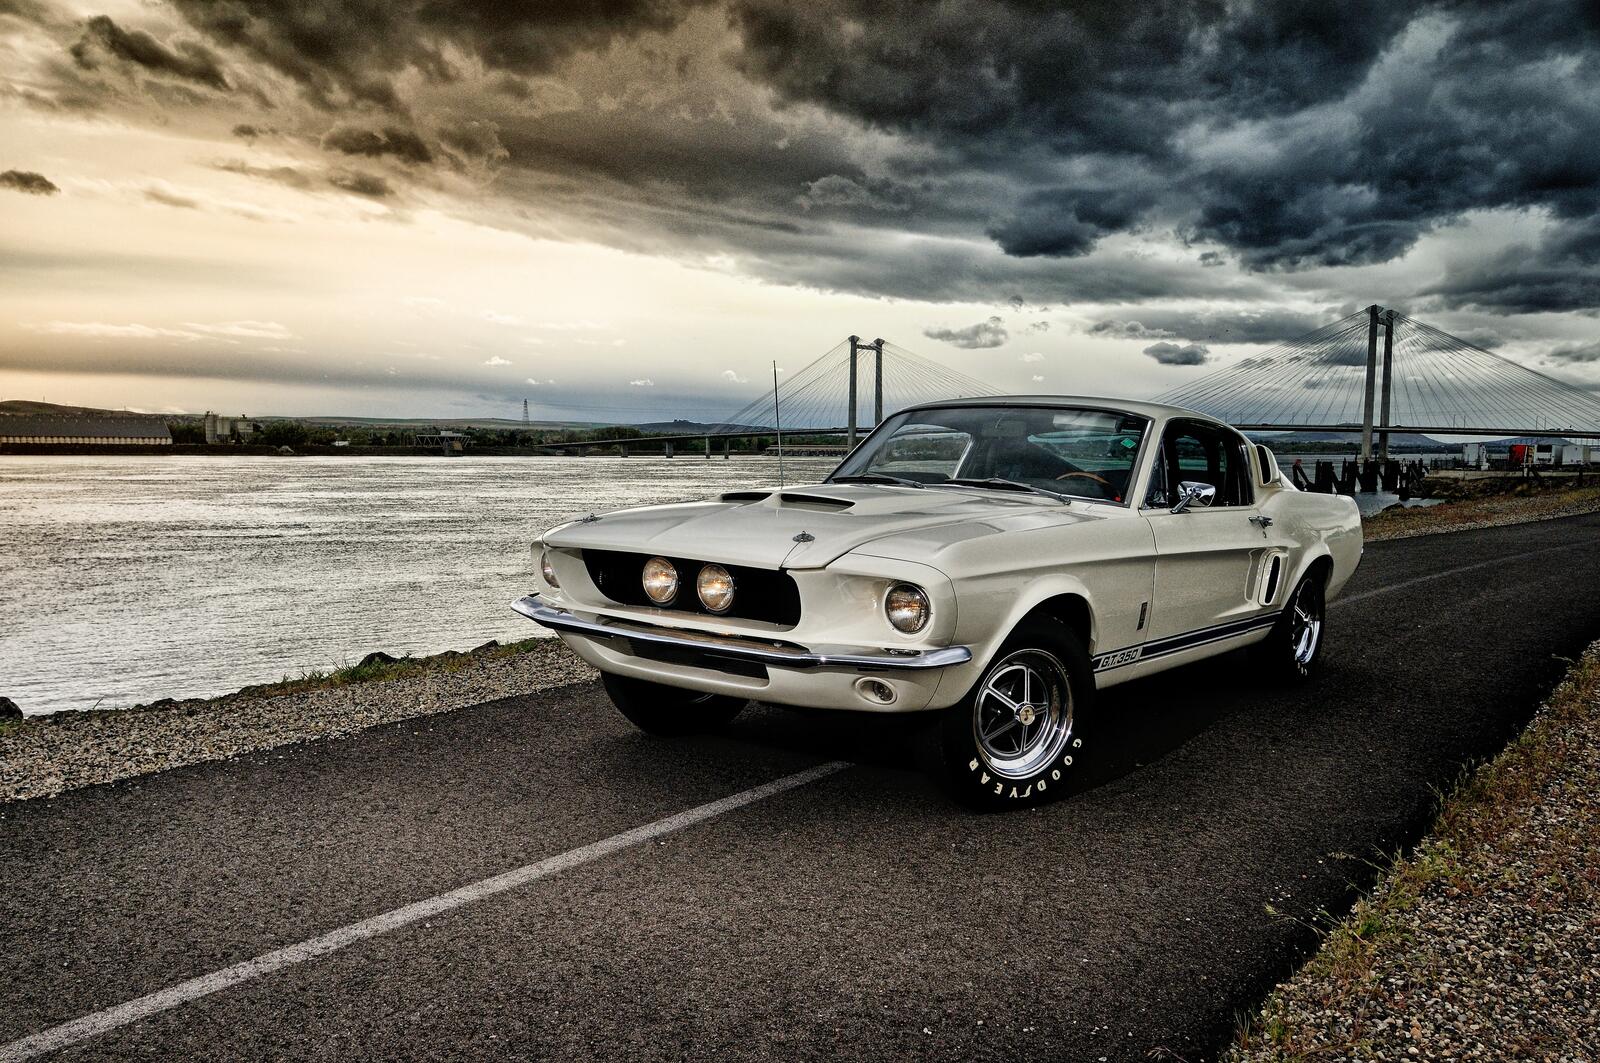 Wallpapers Ford Mustang silvery sea shore on the desktop